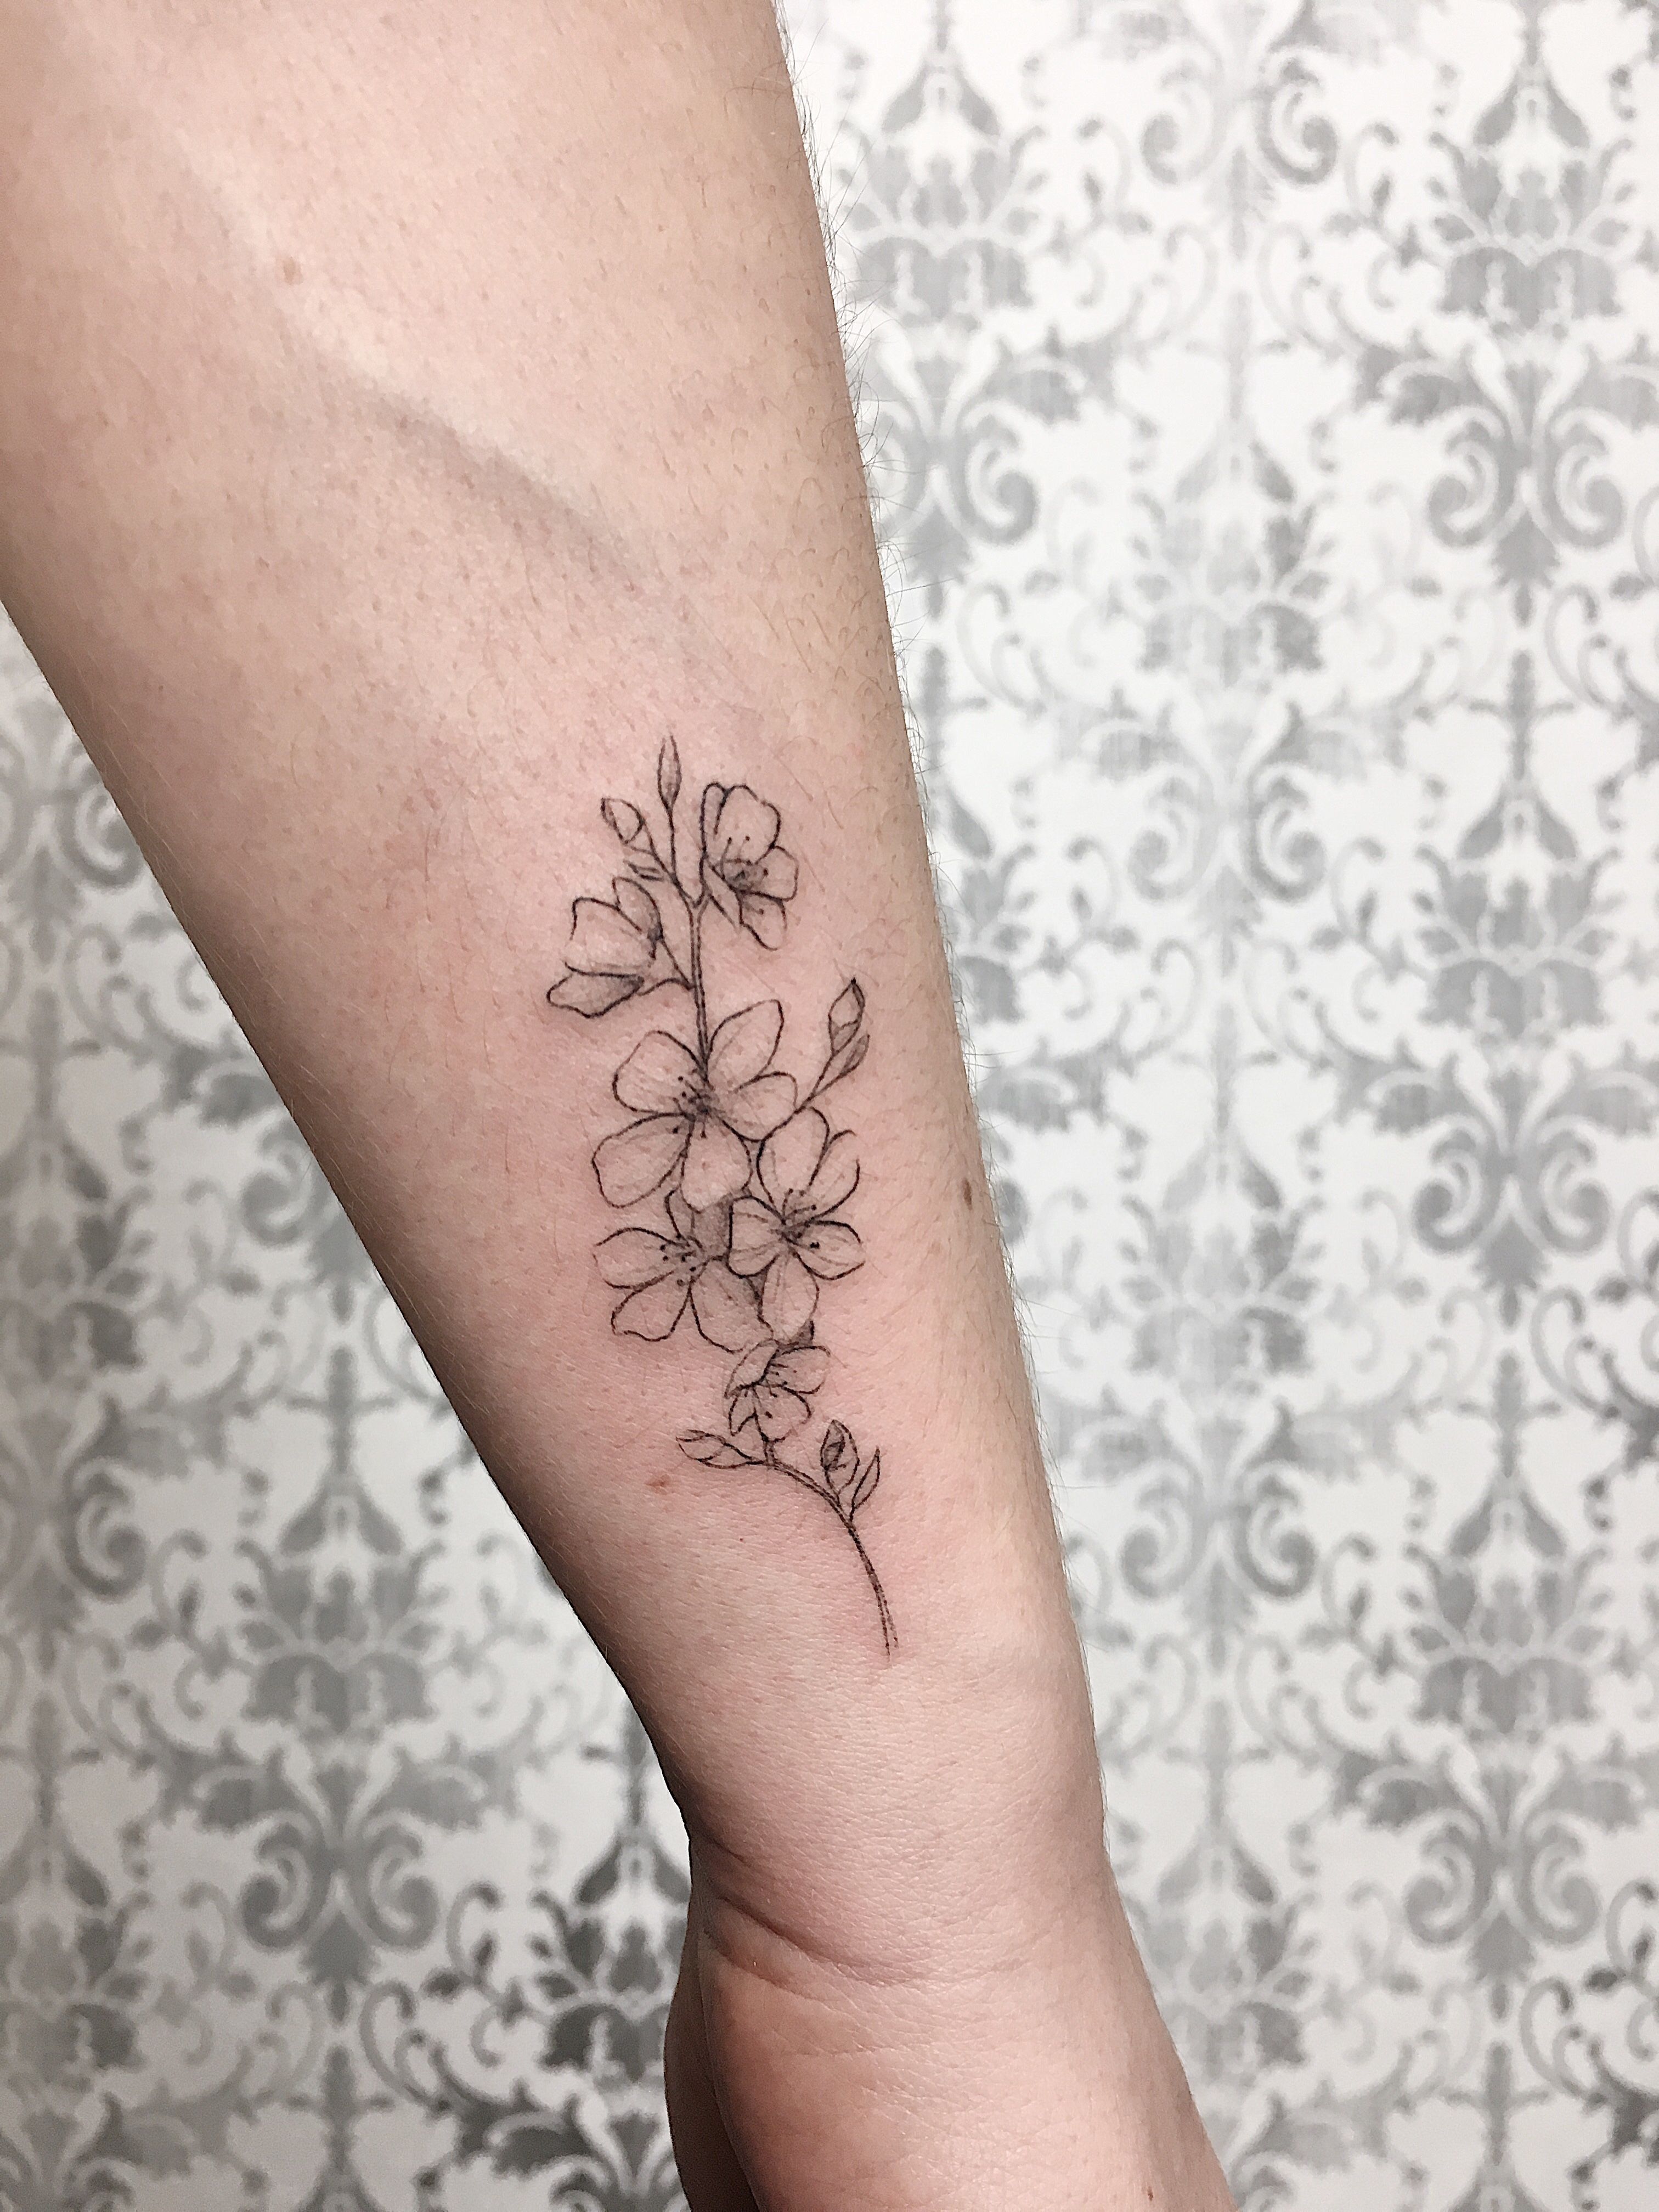  Short Description of Meaning and Types of Flower Tattoos 